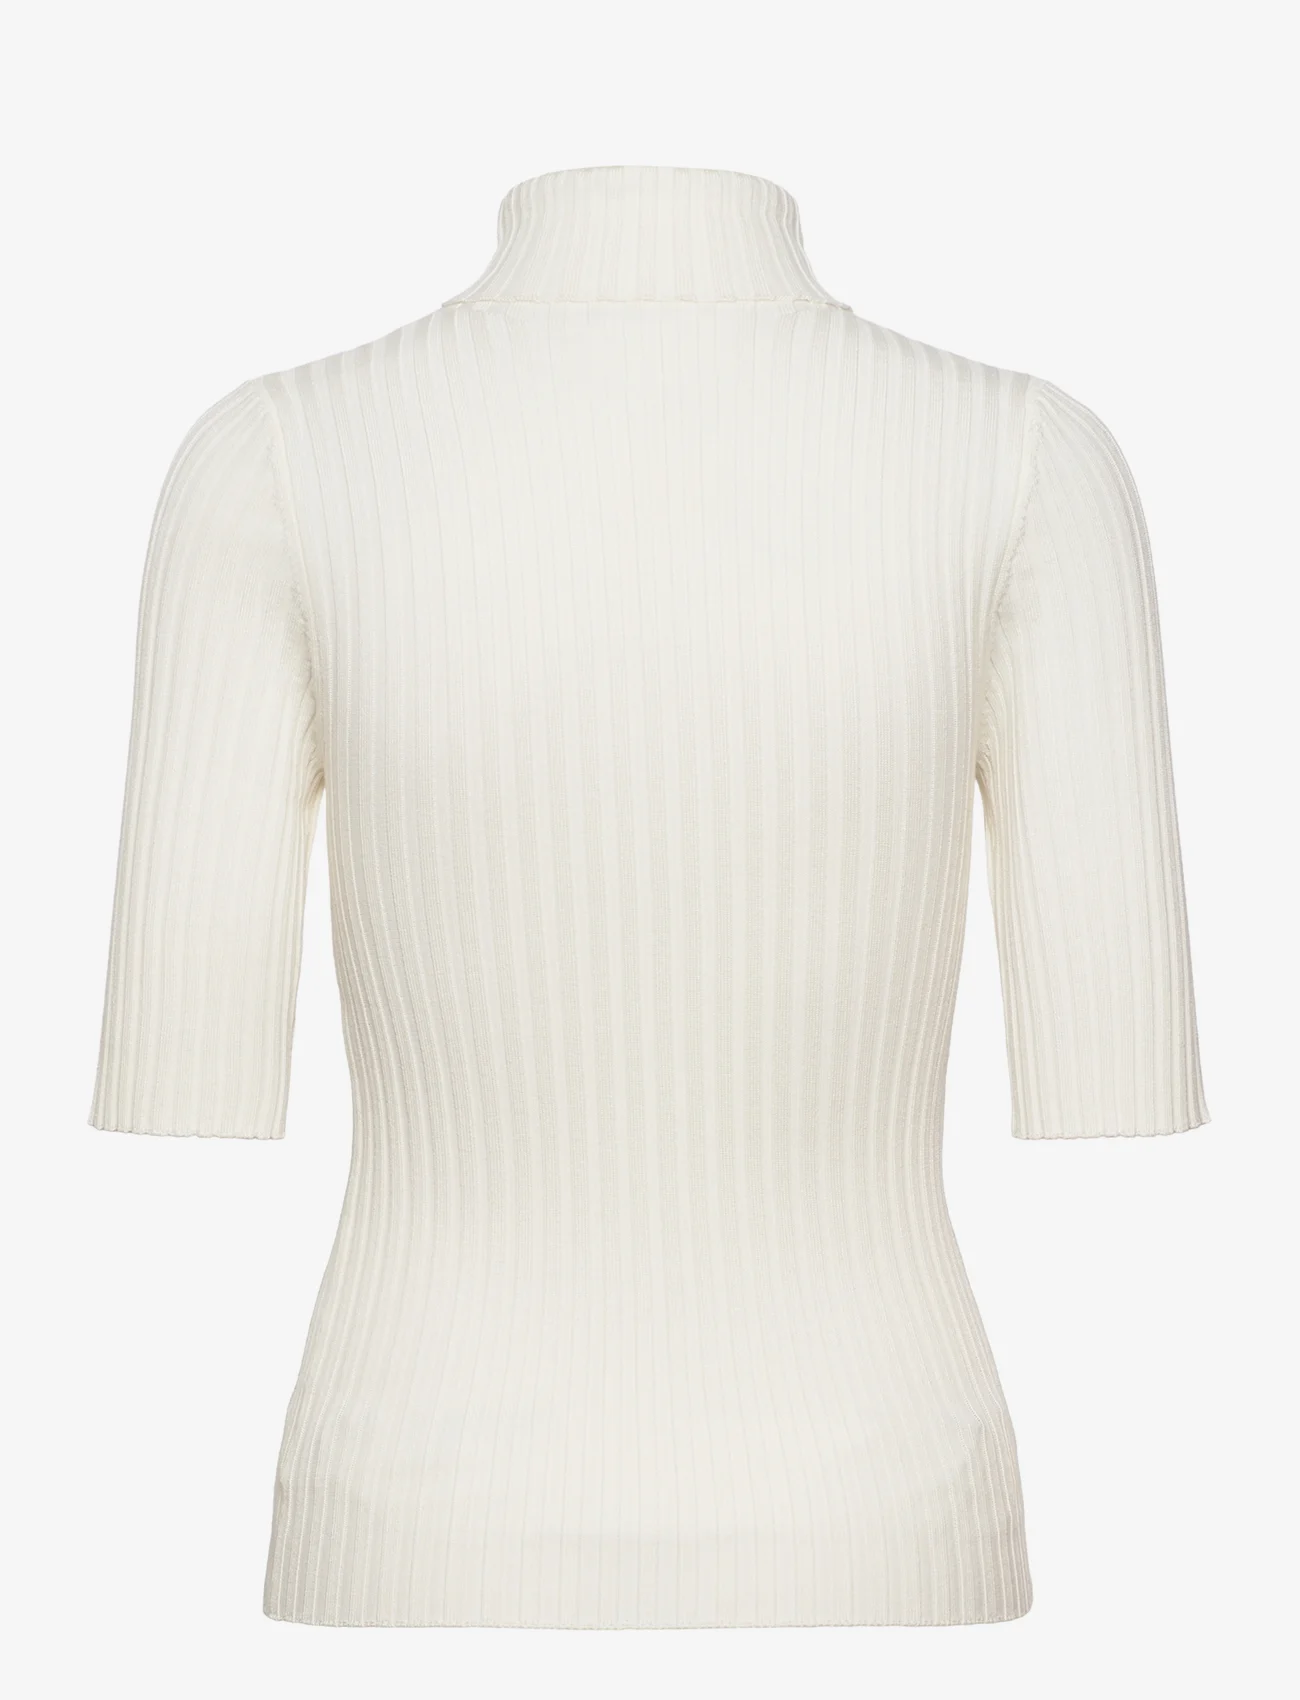 NORR - Franco knit tee - gensere - off-white - 1